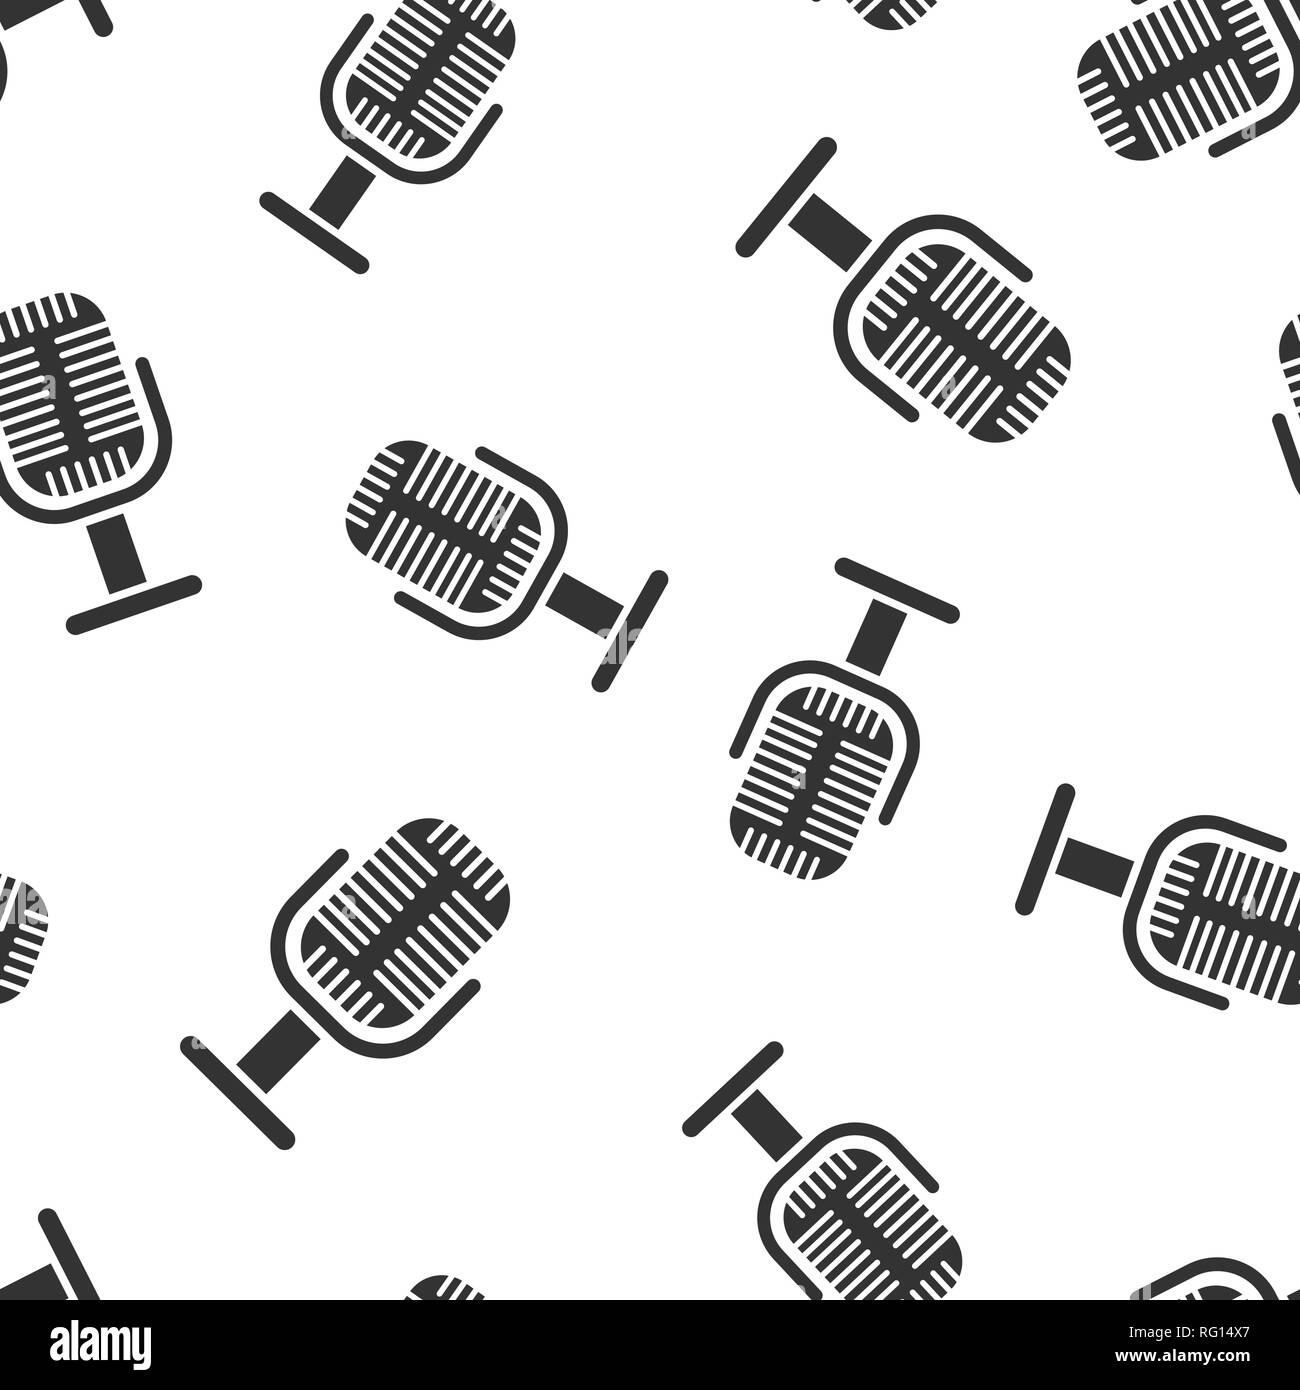 Microphone icon seamless pattern background. Mic broadcast vector illustration. Mike speech symbol pattern. Stock Vector